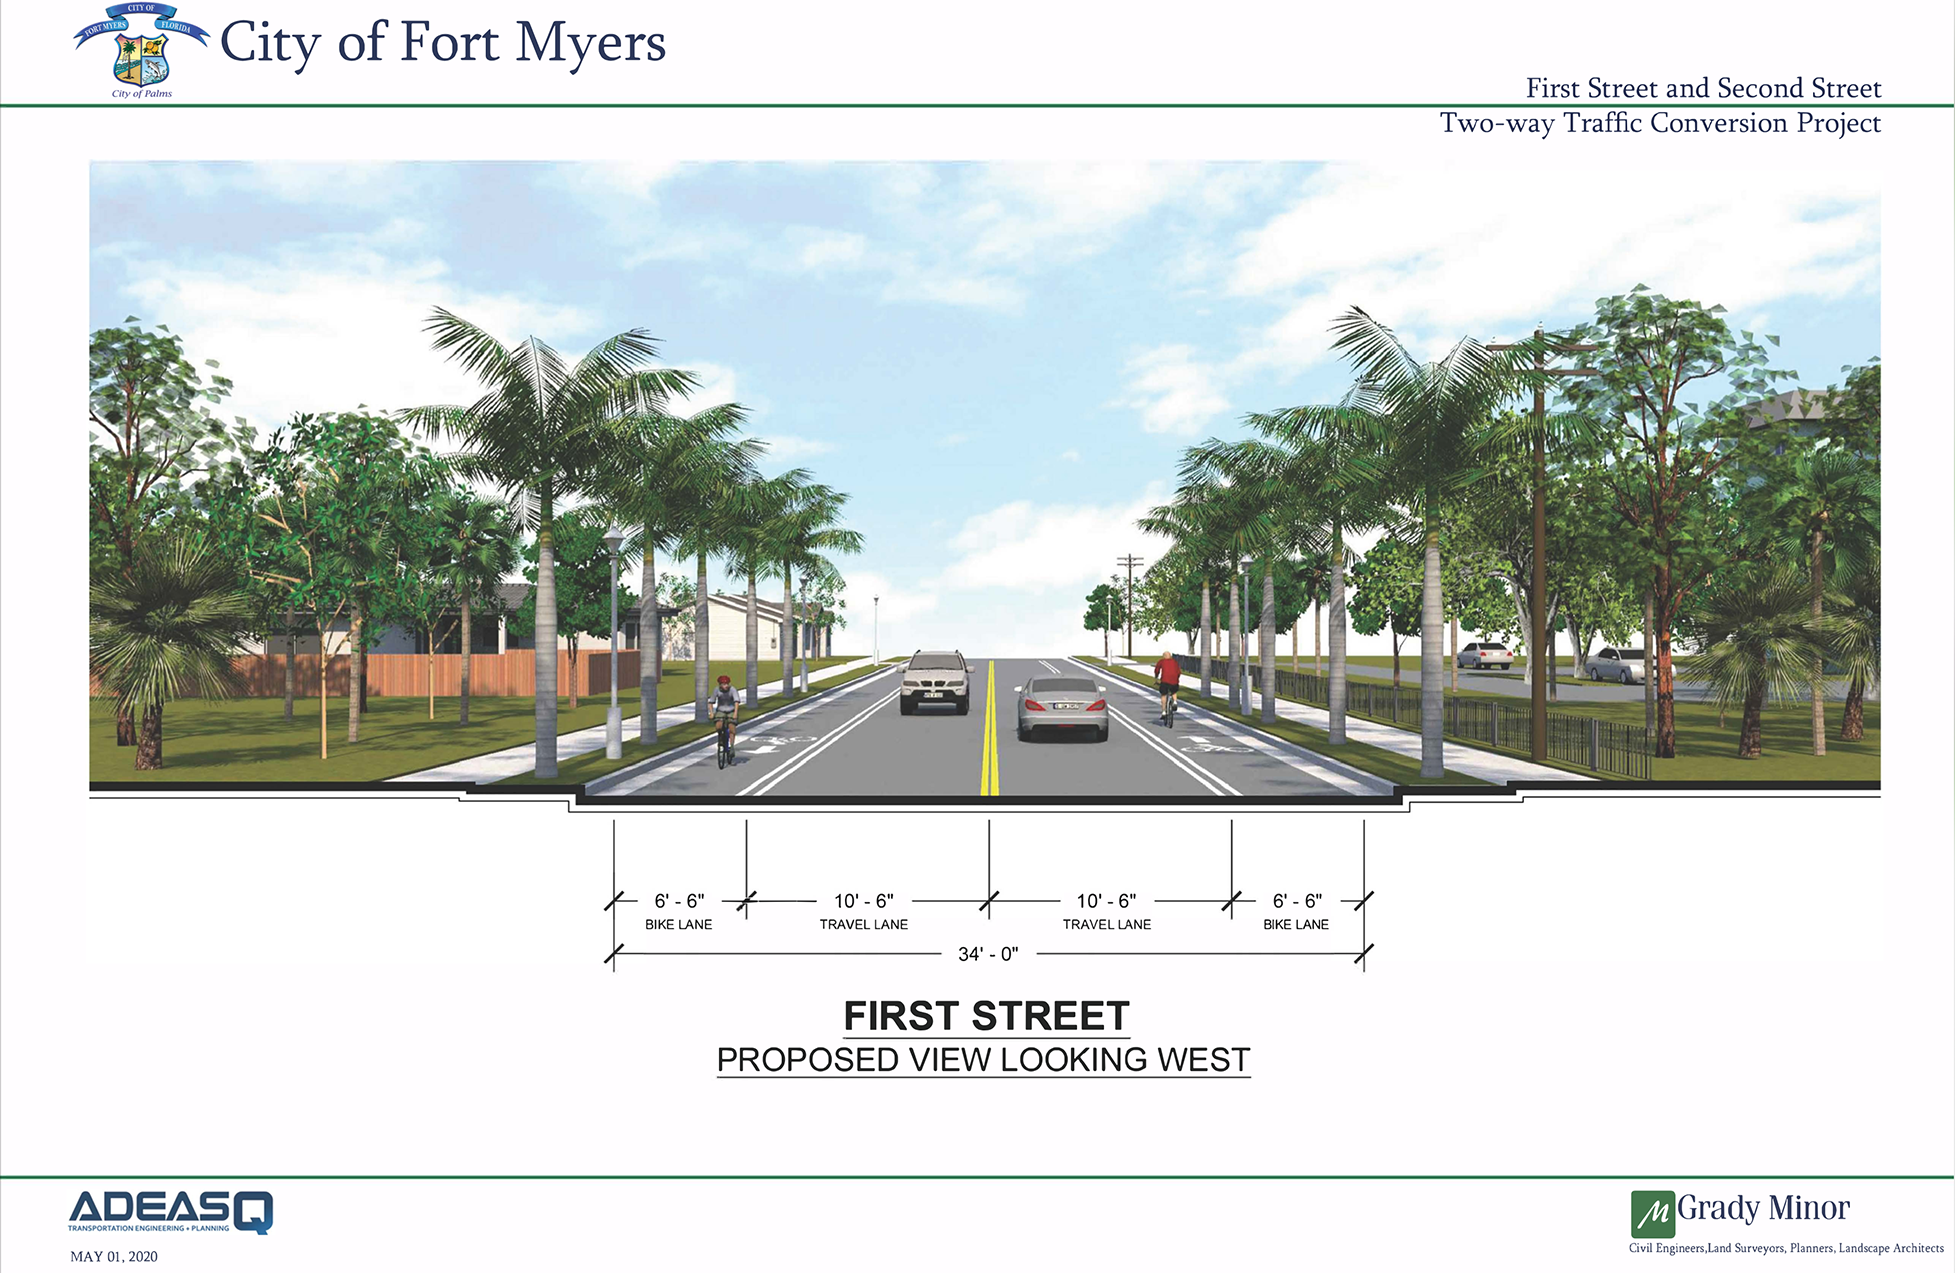 City of Fort Myers 1st Street and 2nd Street Two-Way Conversion